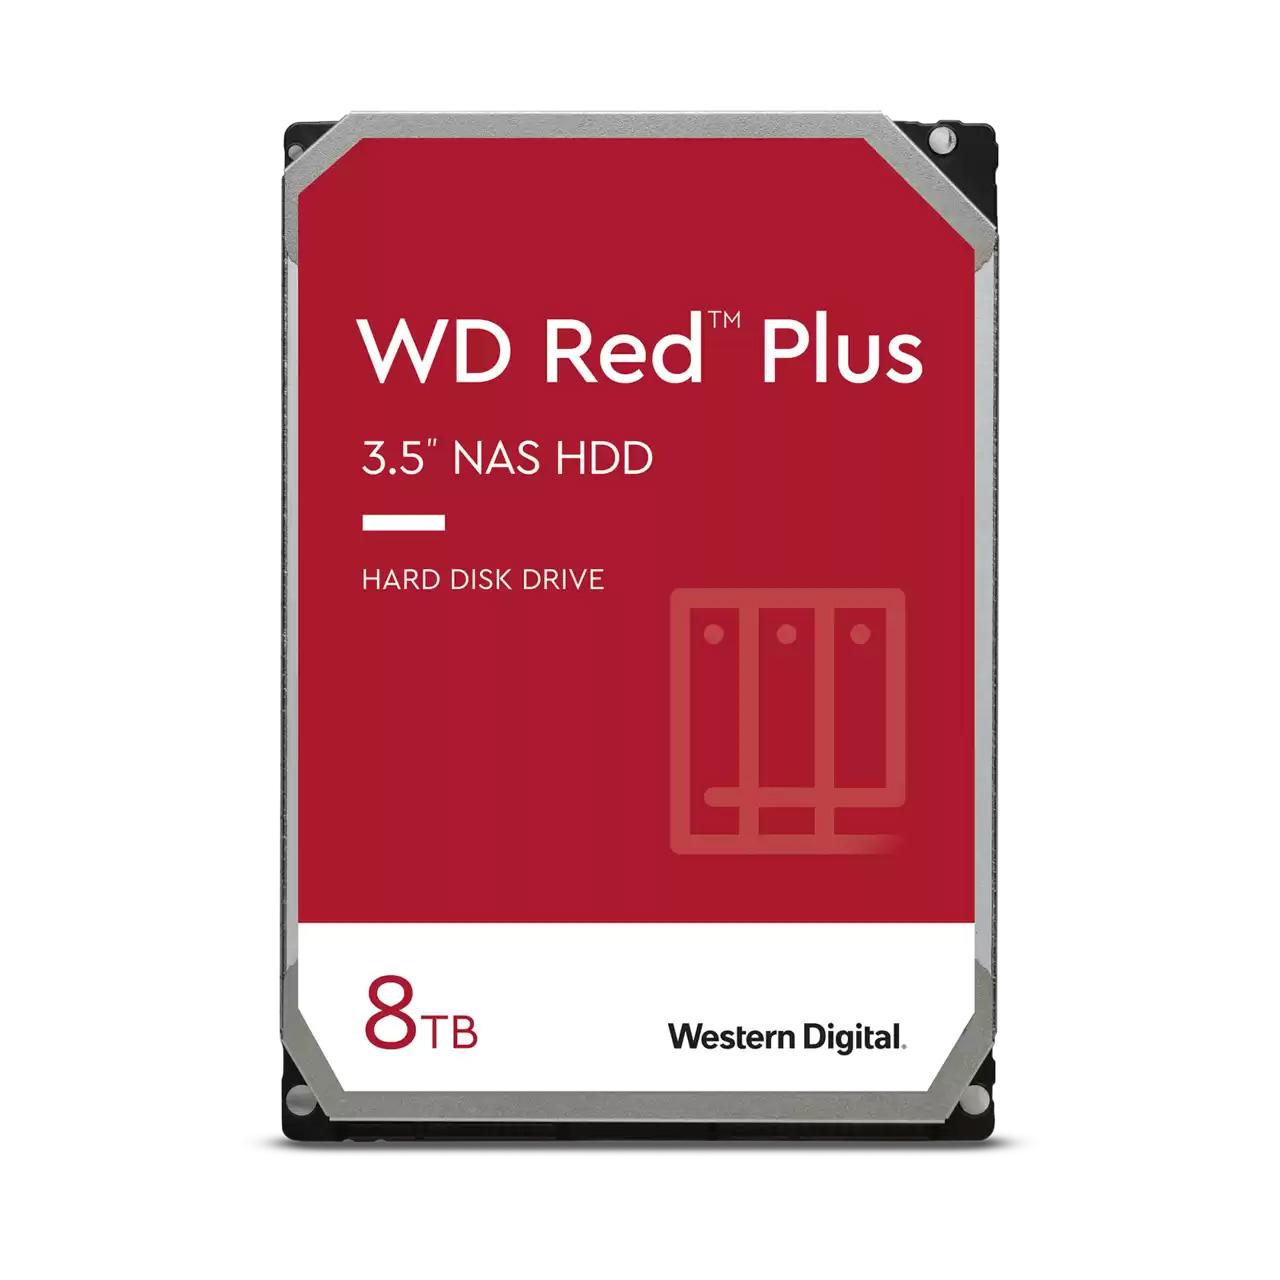 8TB WD Red Plus 3.5in SATA Internal Hard Drive for $149.99 Shipped